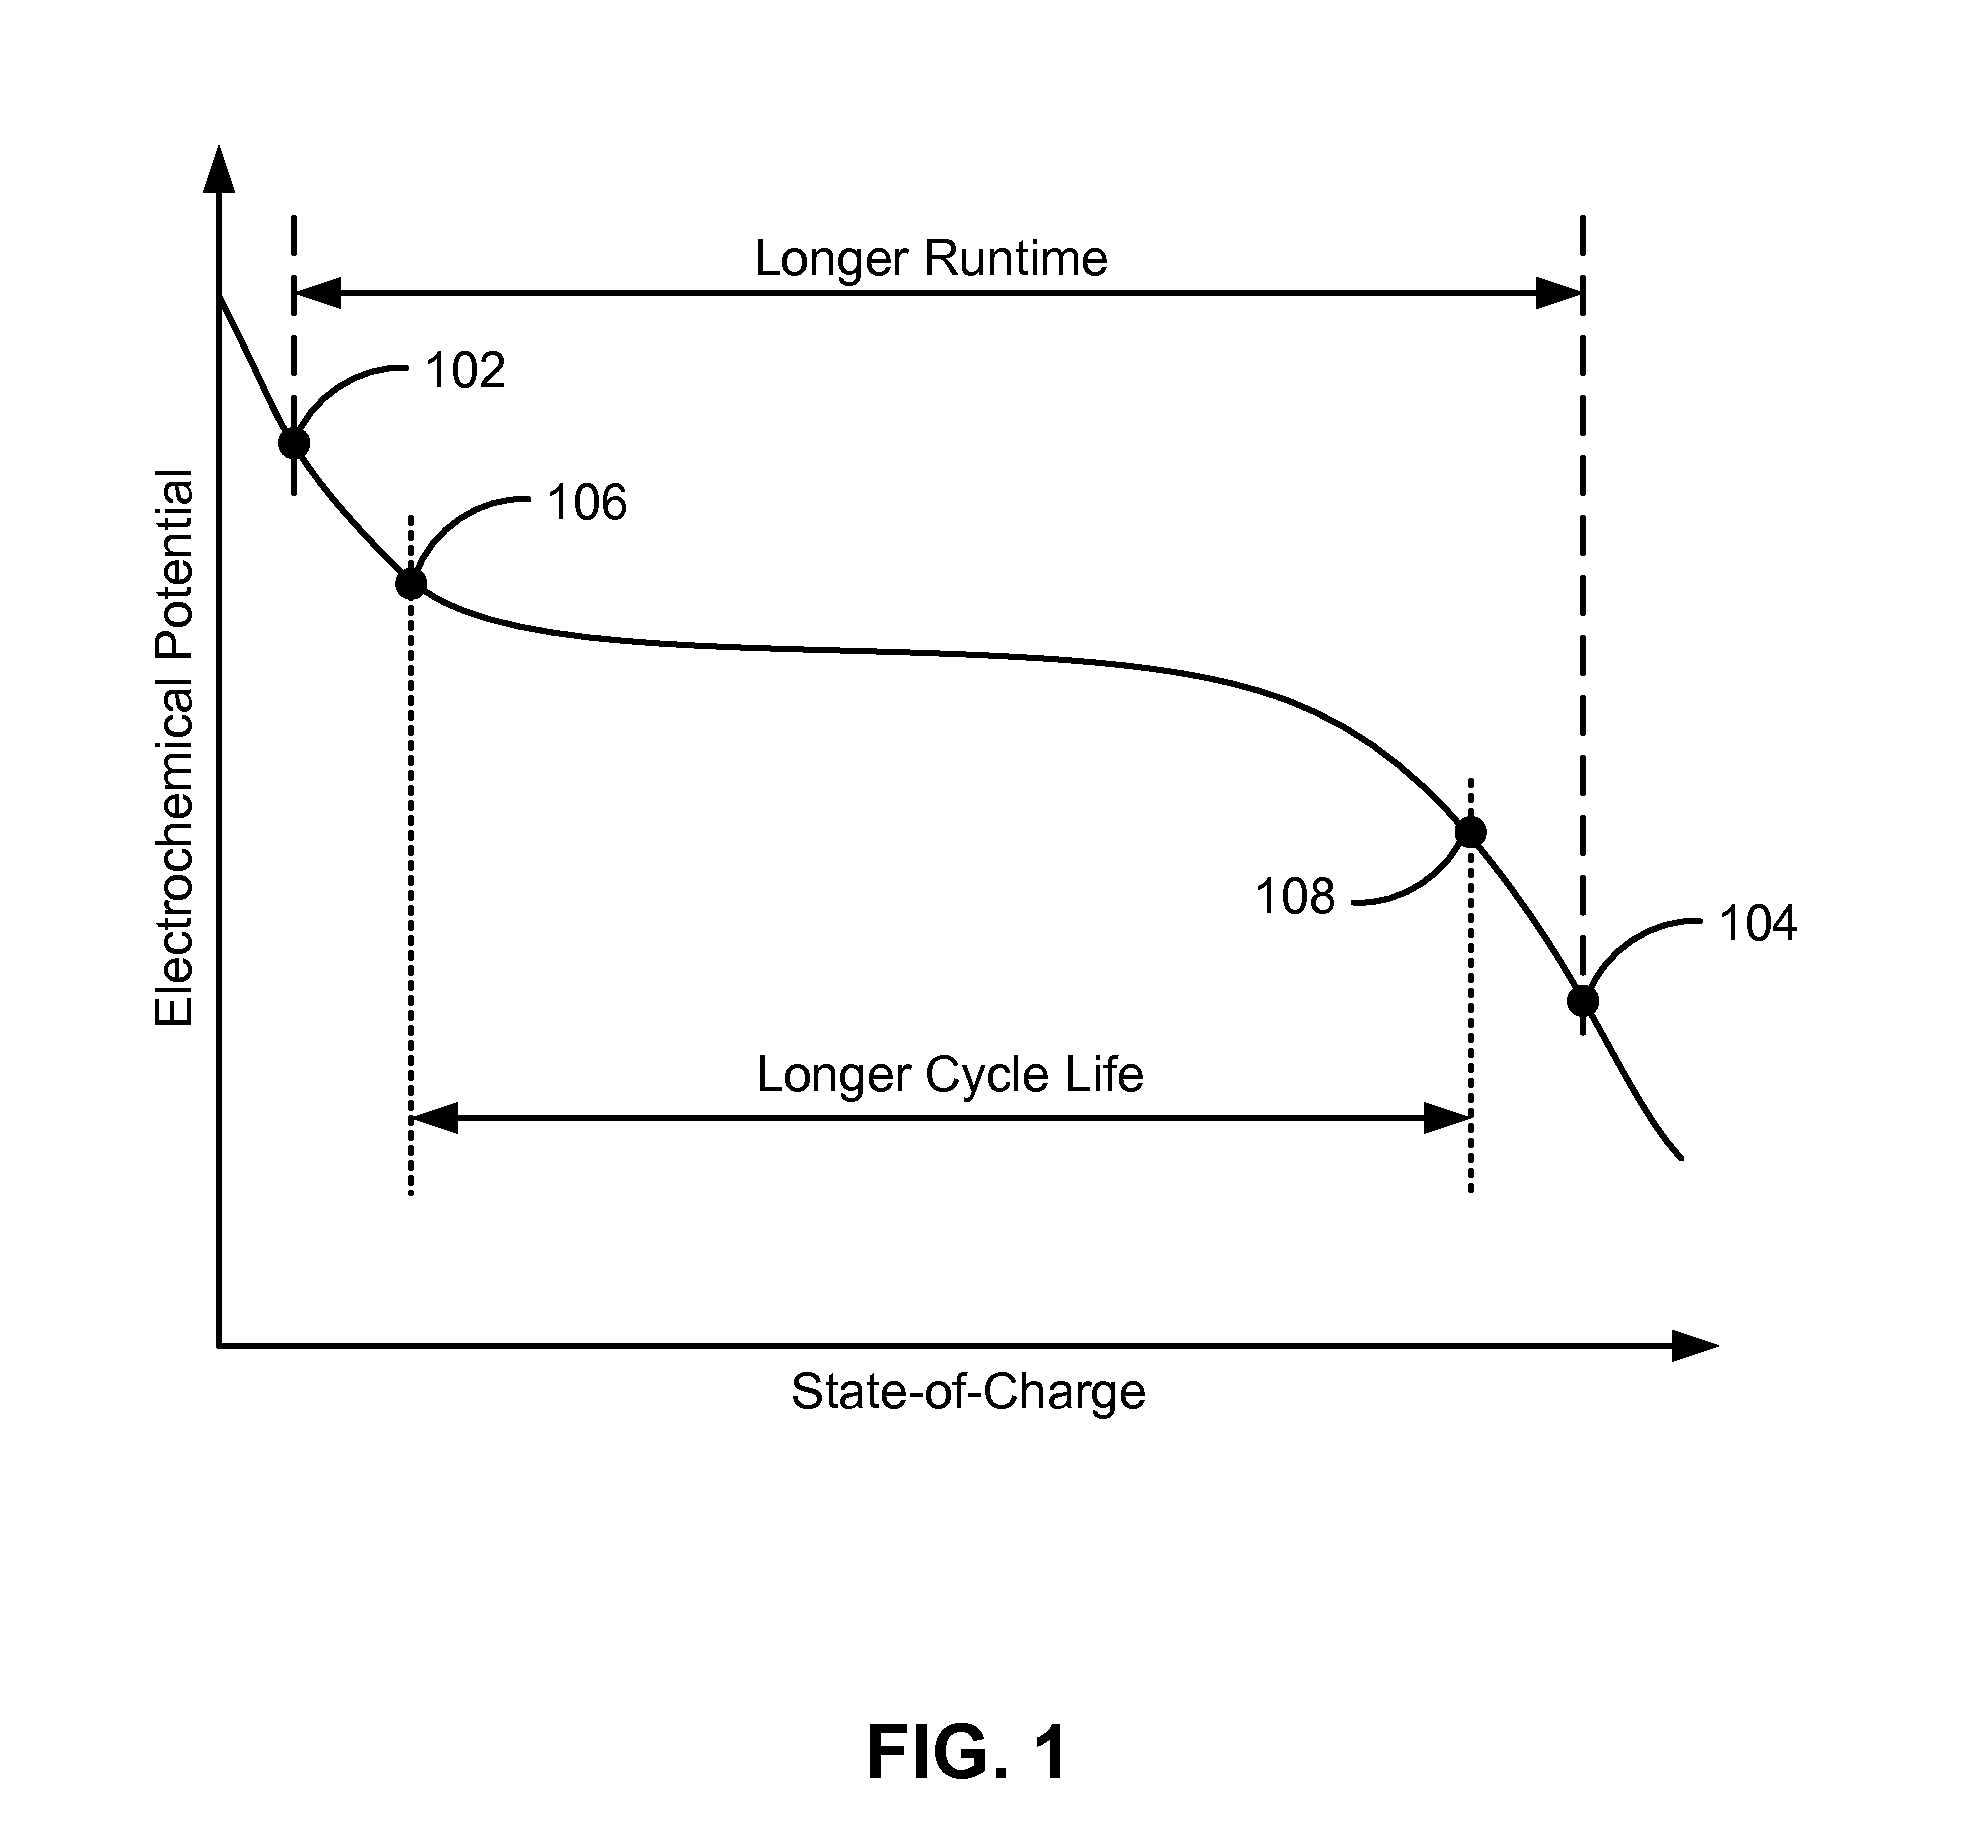 Managing Cycle and Runtime in Batteries for Portable Electronic Devices